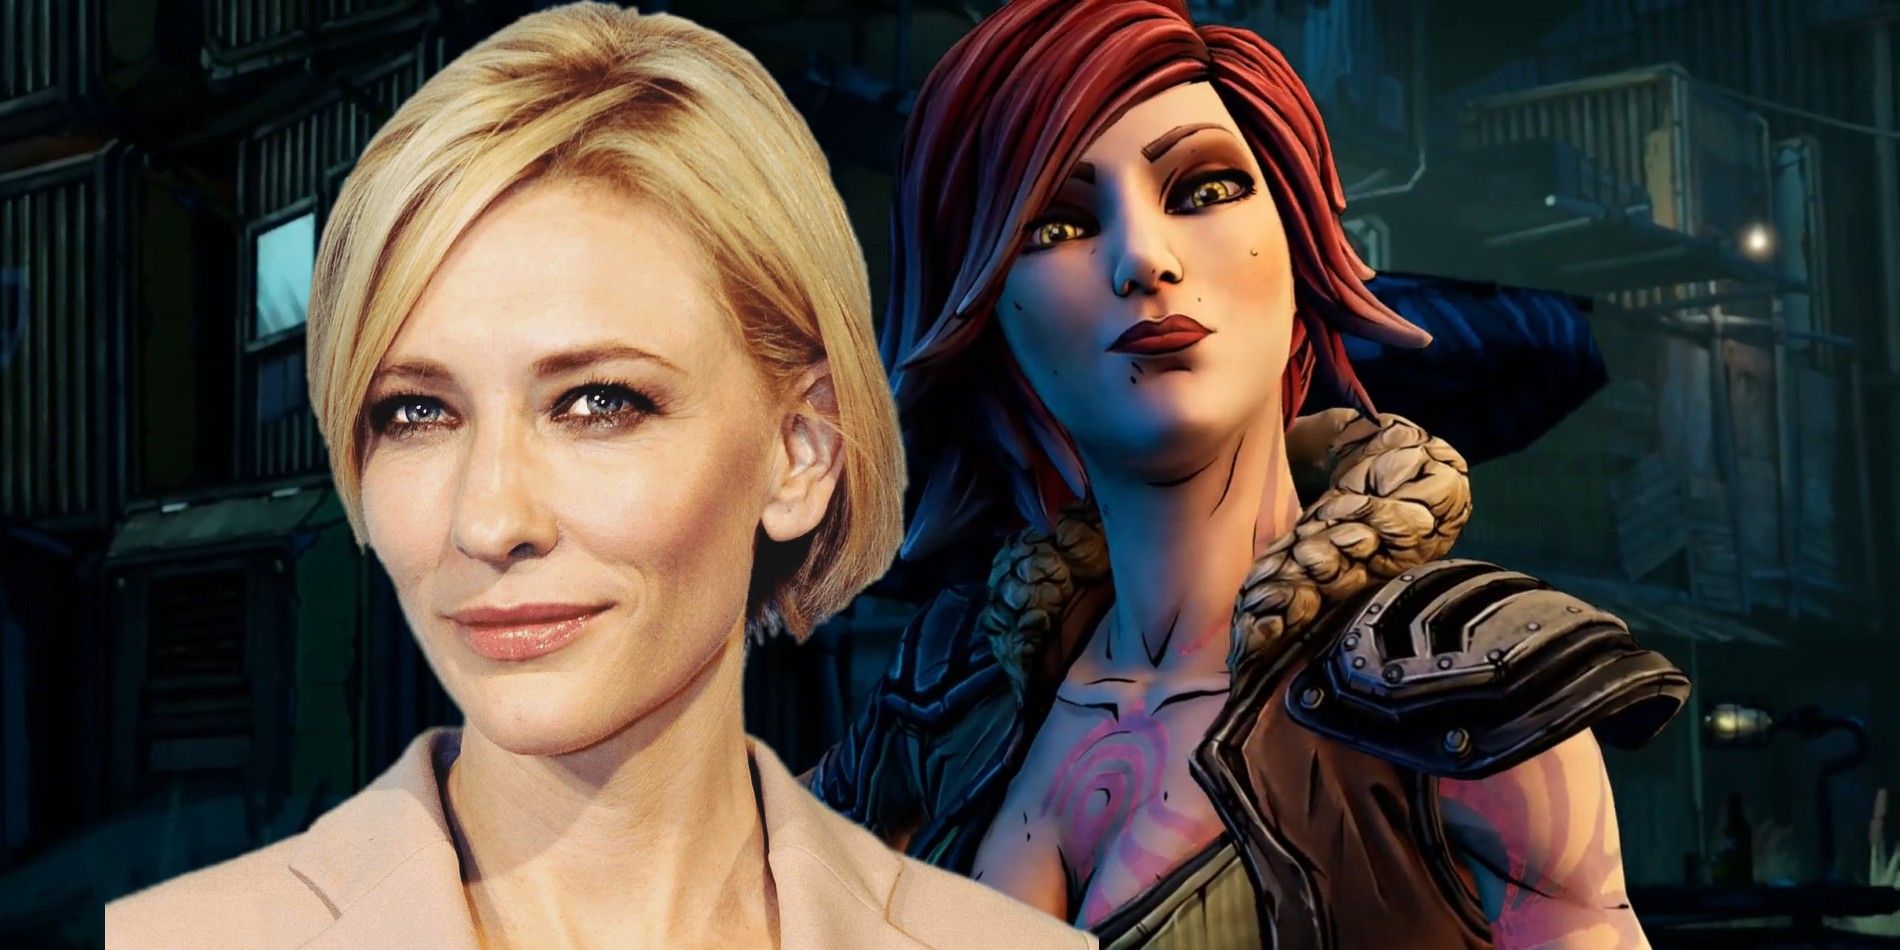 Cate Blanchett Cast As Lilith in Borderlands Movie